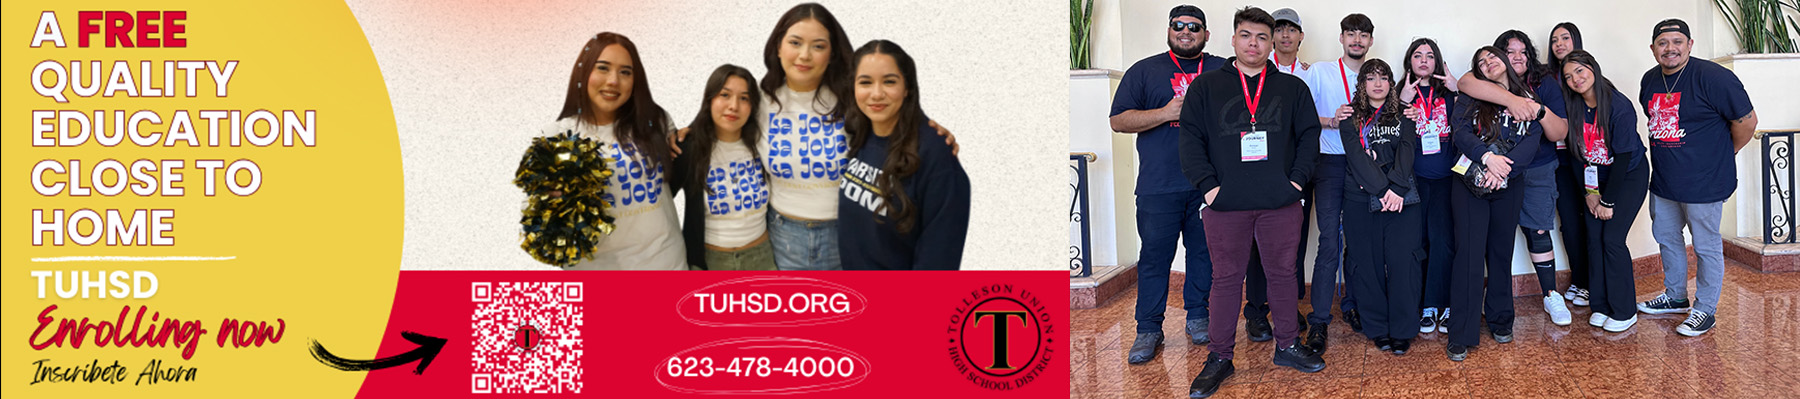 A free quality education close to home - TUHSD Enrolling now | Inscribete Ahora - tuhsd.org - 623-478-4000 | Group of students